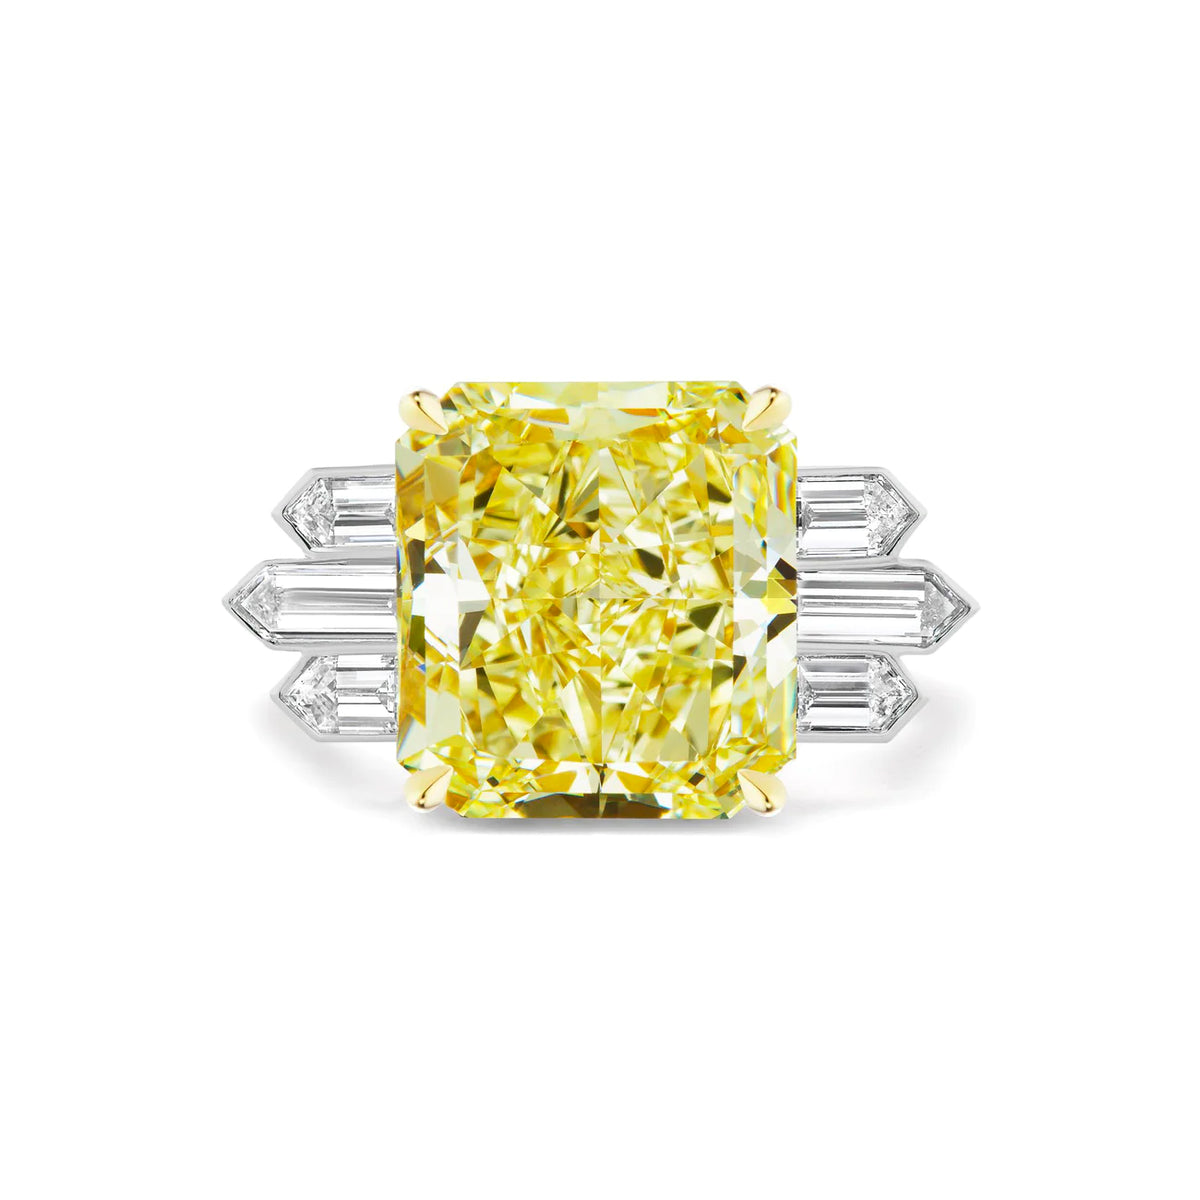 Art Deco Engagement Ring with Fancy Yellow Radiant Cut Diamond and Bullet Baguette Side Stones